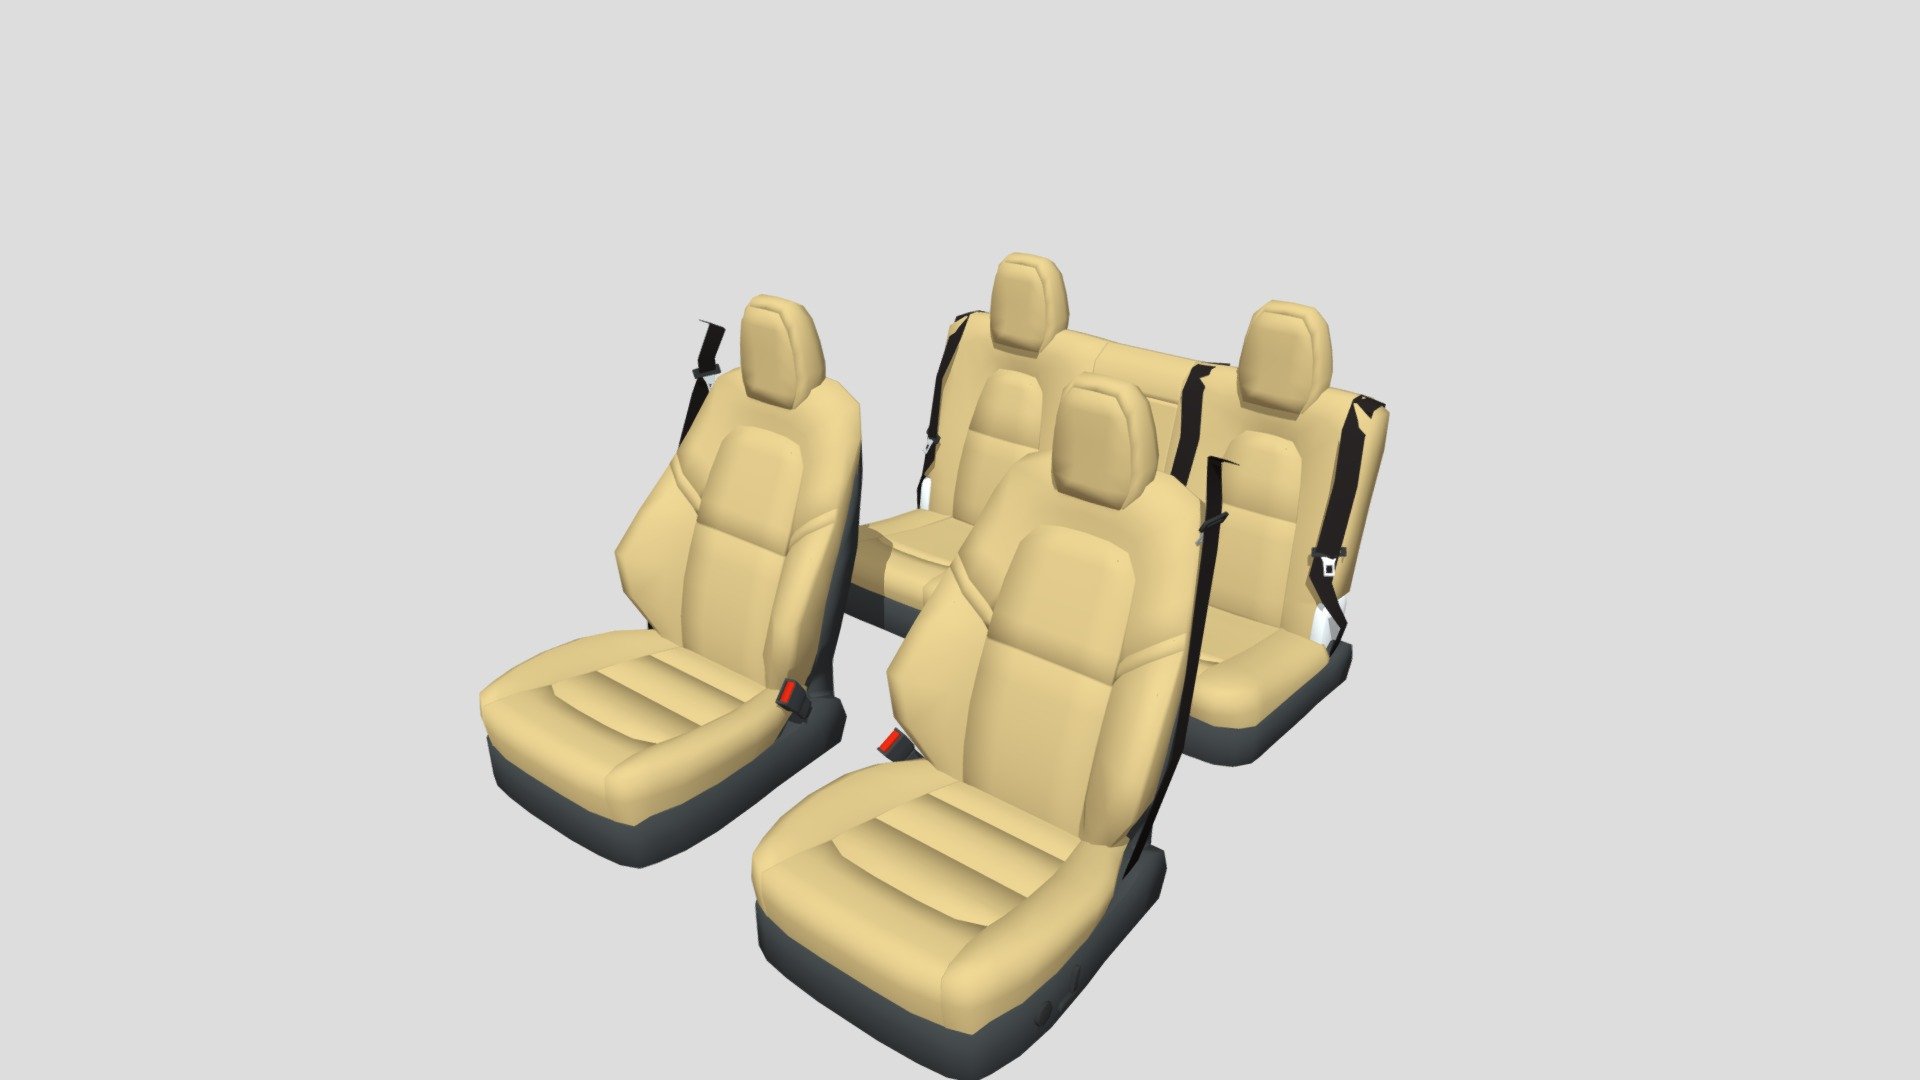 Tesla Model Y Seats 3d model rendered with Cycles in Blender, as per seen on attached images.

File formats:
-.blend, rendered with cycles, as seen in the images;
-.obj, with materials applied;
-.dae, with materials applied;
-.fbx, with material slots applied;
-.stl;

Files come named appropriately and split by file format.

3D Software:
The 3D model was originally created in Blender 2.79 and rendered with Cycles.

Materials and textures:
The models have materials applied in all formats, and are ready to import and render.

Preview scenes:
The preview images are rendered in Blender using its built-in render engine &lsquo;Cycles'.
Note that the blend files come directly with the rendering scene included and the render command will generate the exact result as seen in previews.
Scene elements are on a different layer from the actual model for easier manipulation of objects 3d model